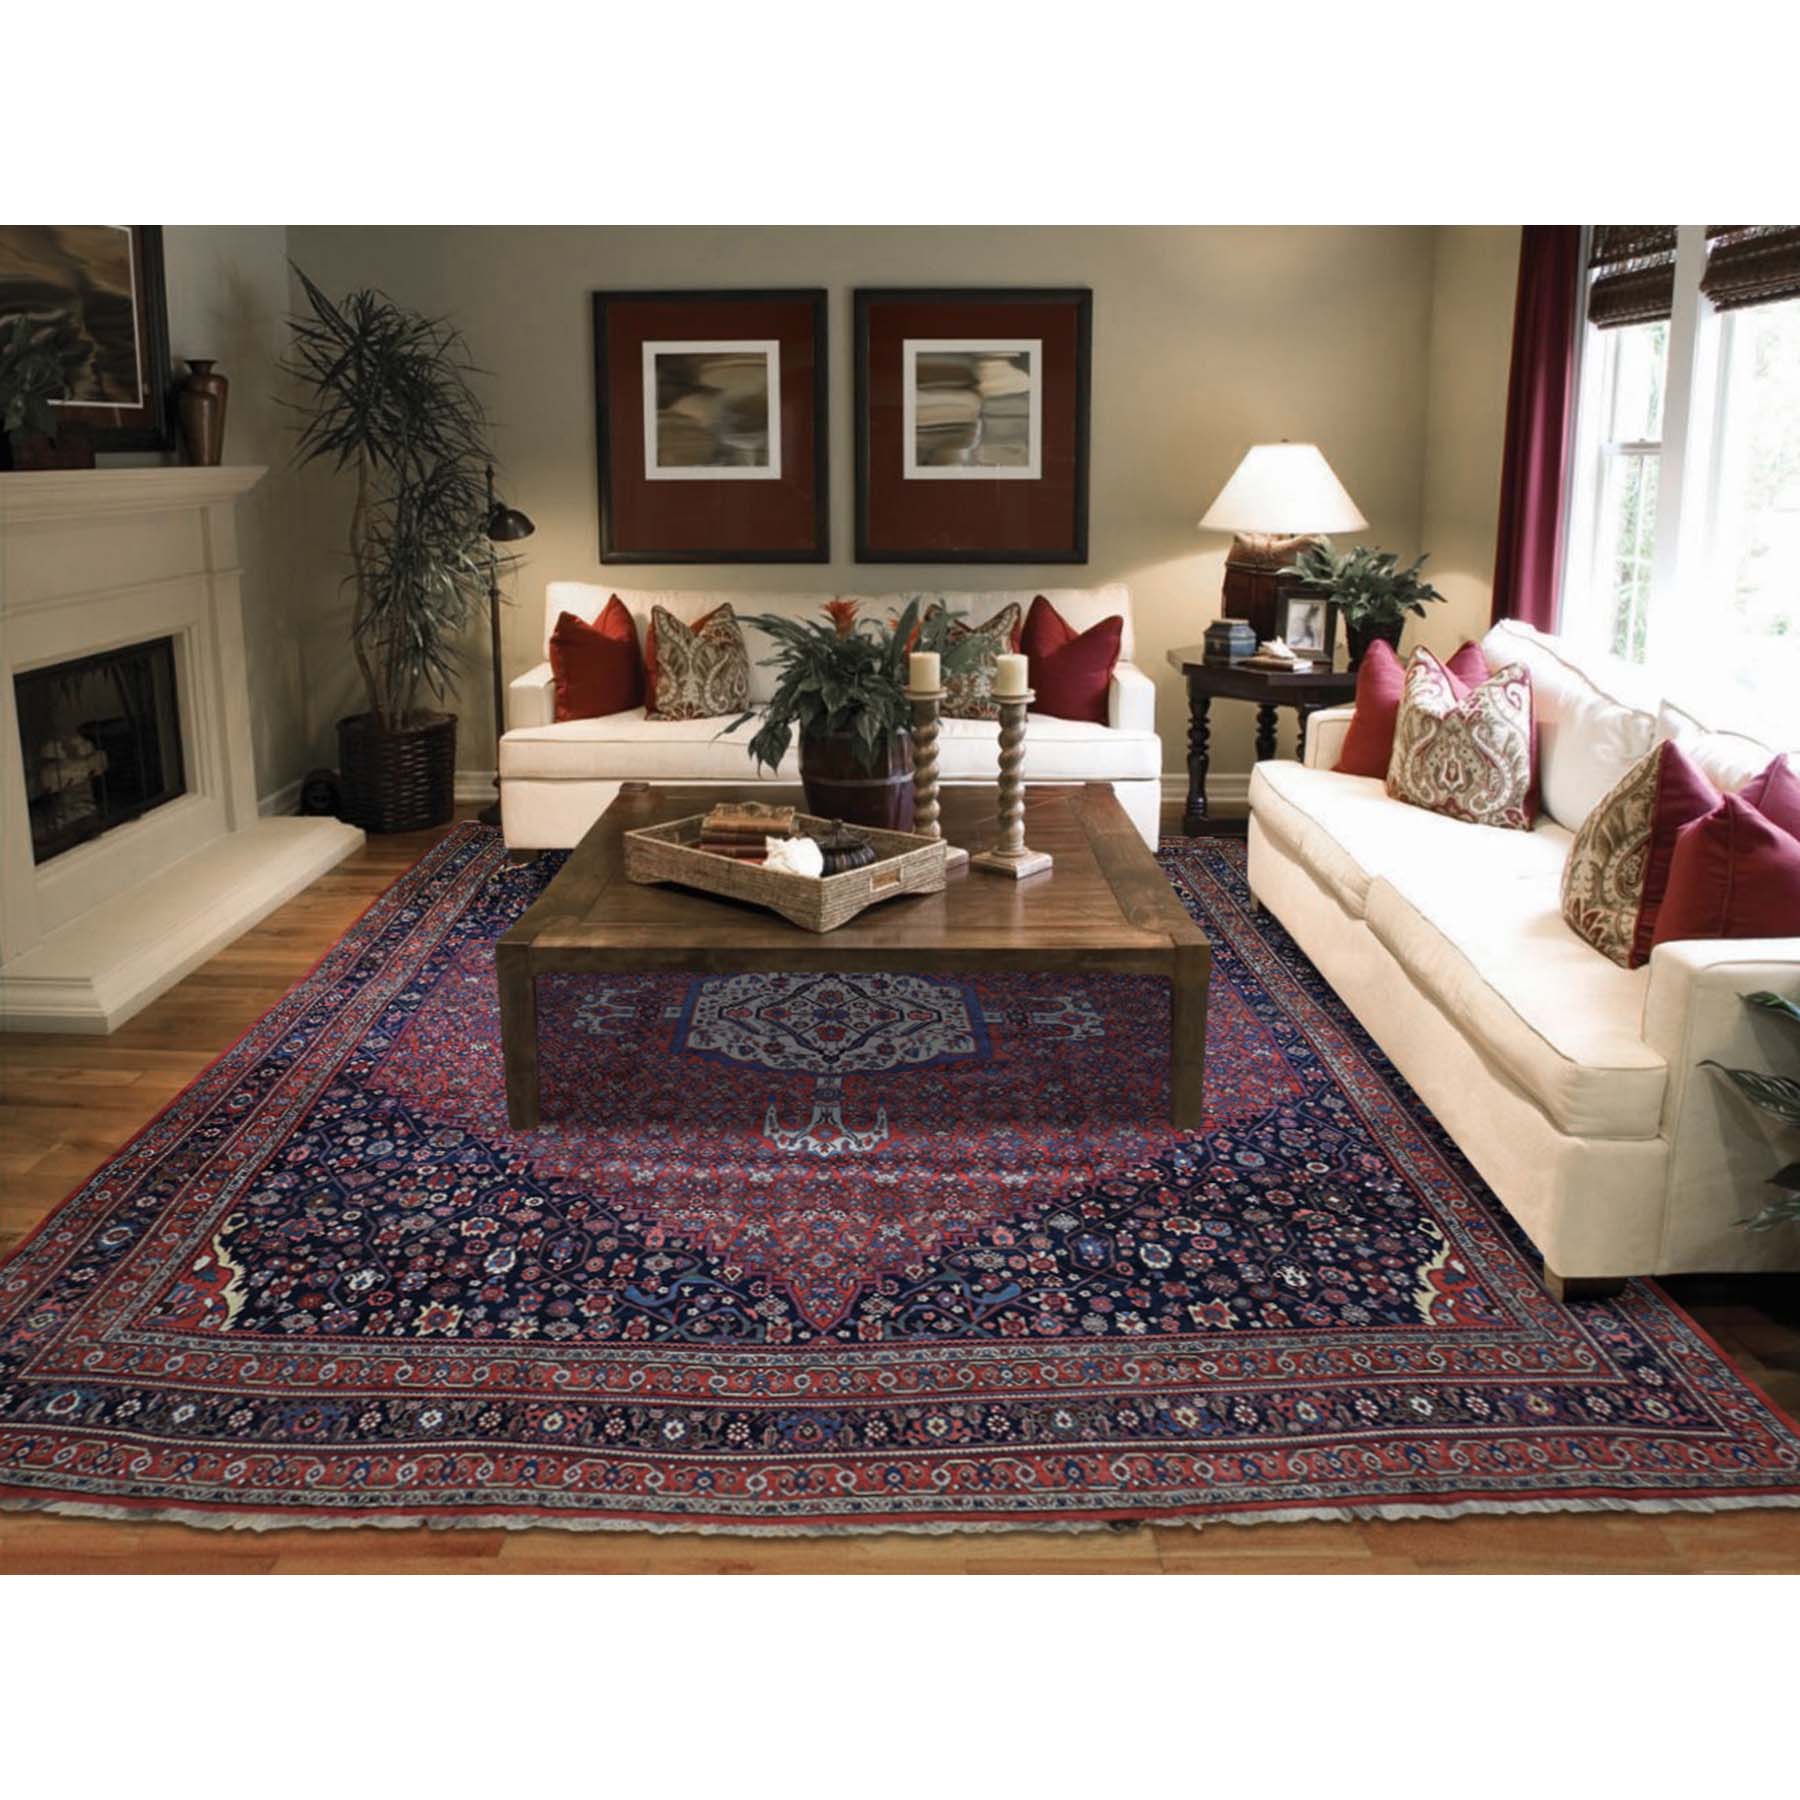 14'6"x19' Antique Persian Bijar Pure Wool Exc Condition Oversize Pure Wool Hand Woven Oriental Rug 